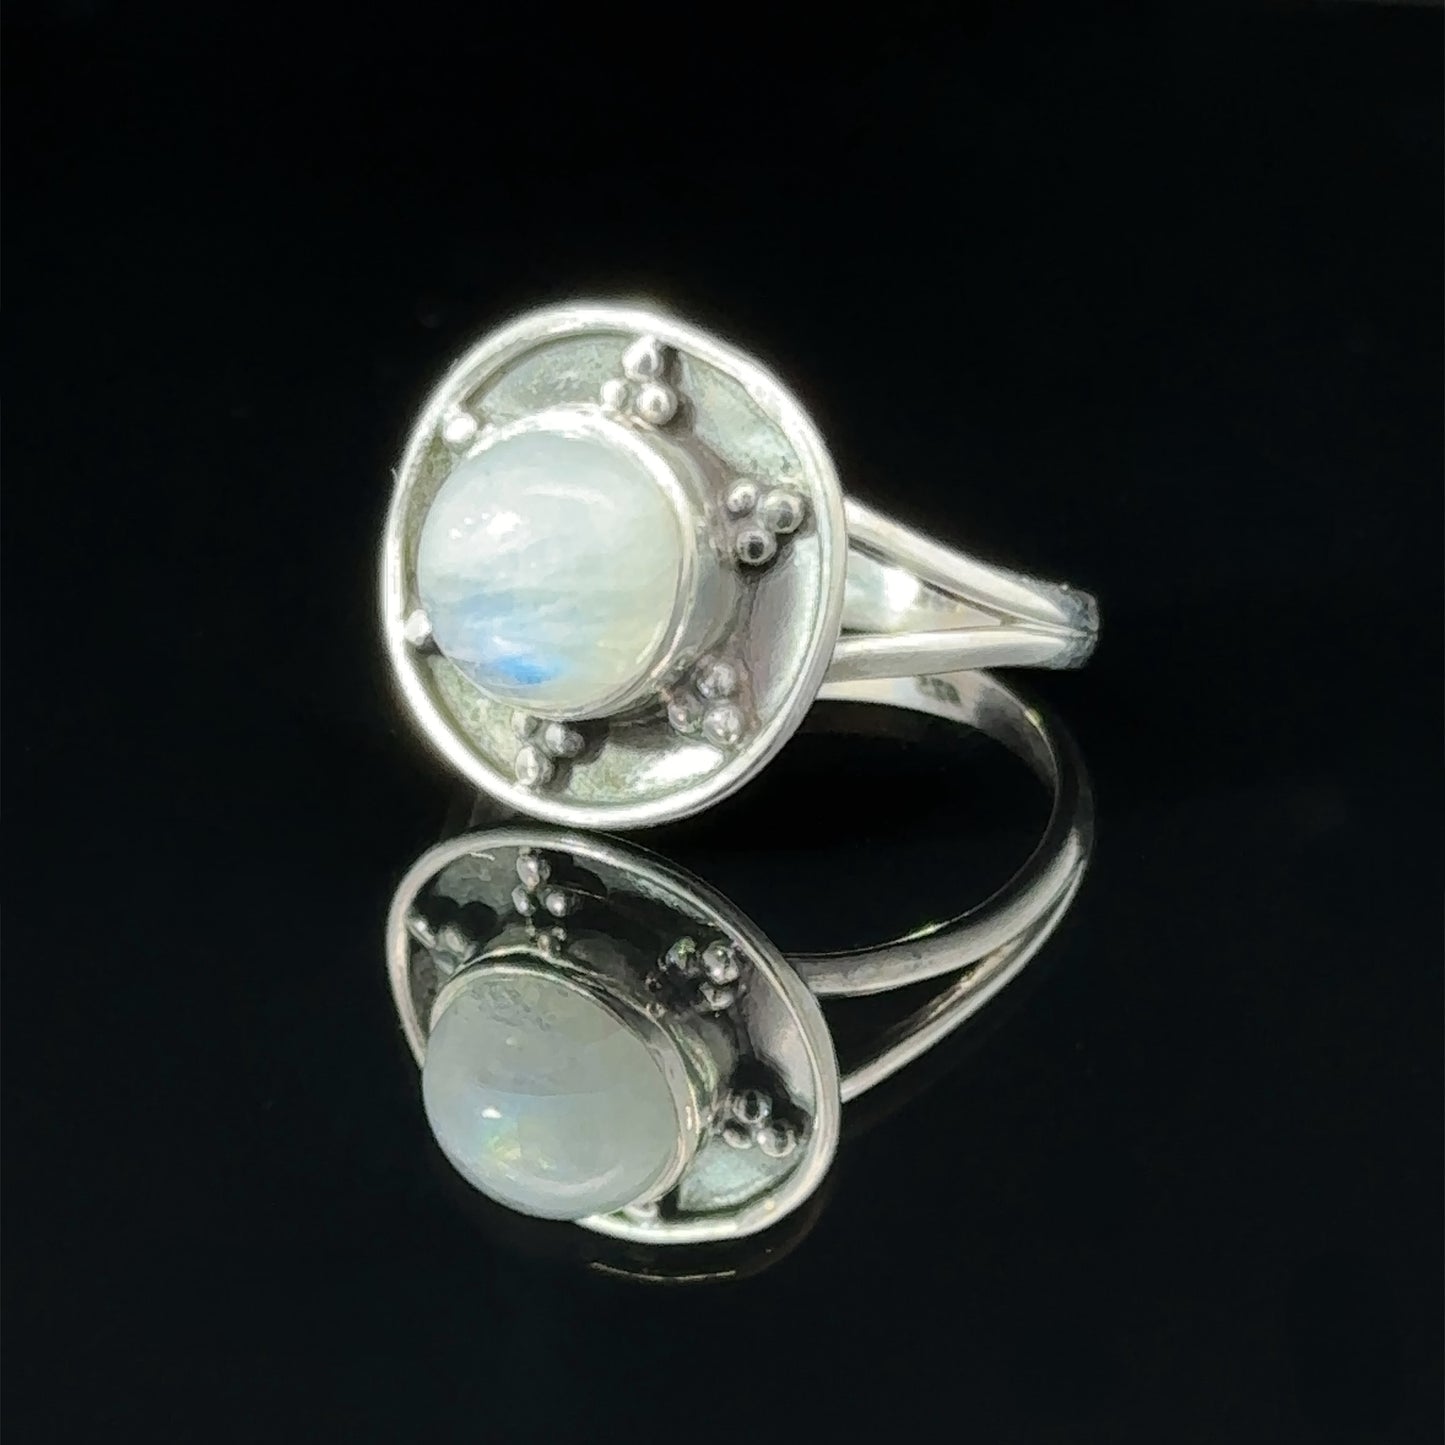 
                  
                    A Gemstone Ring With Unique Oxidized Design featuring a round moonstone set in a circular design with decorative elements, displayed against a black background.
                  
                